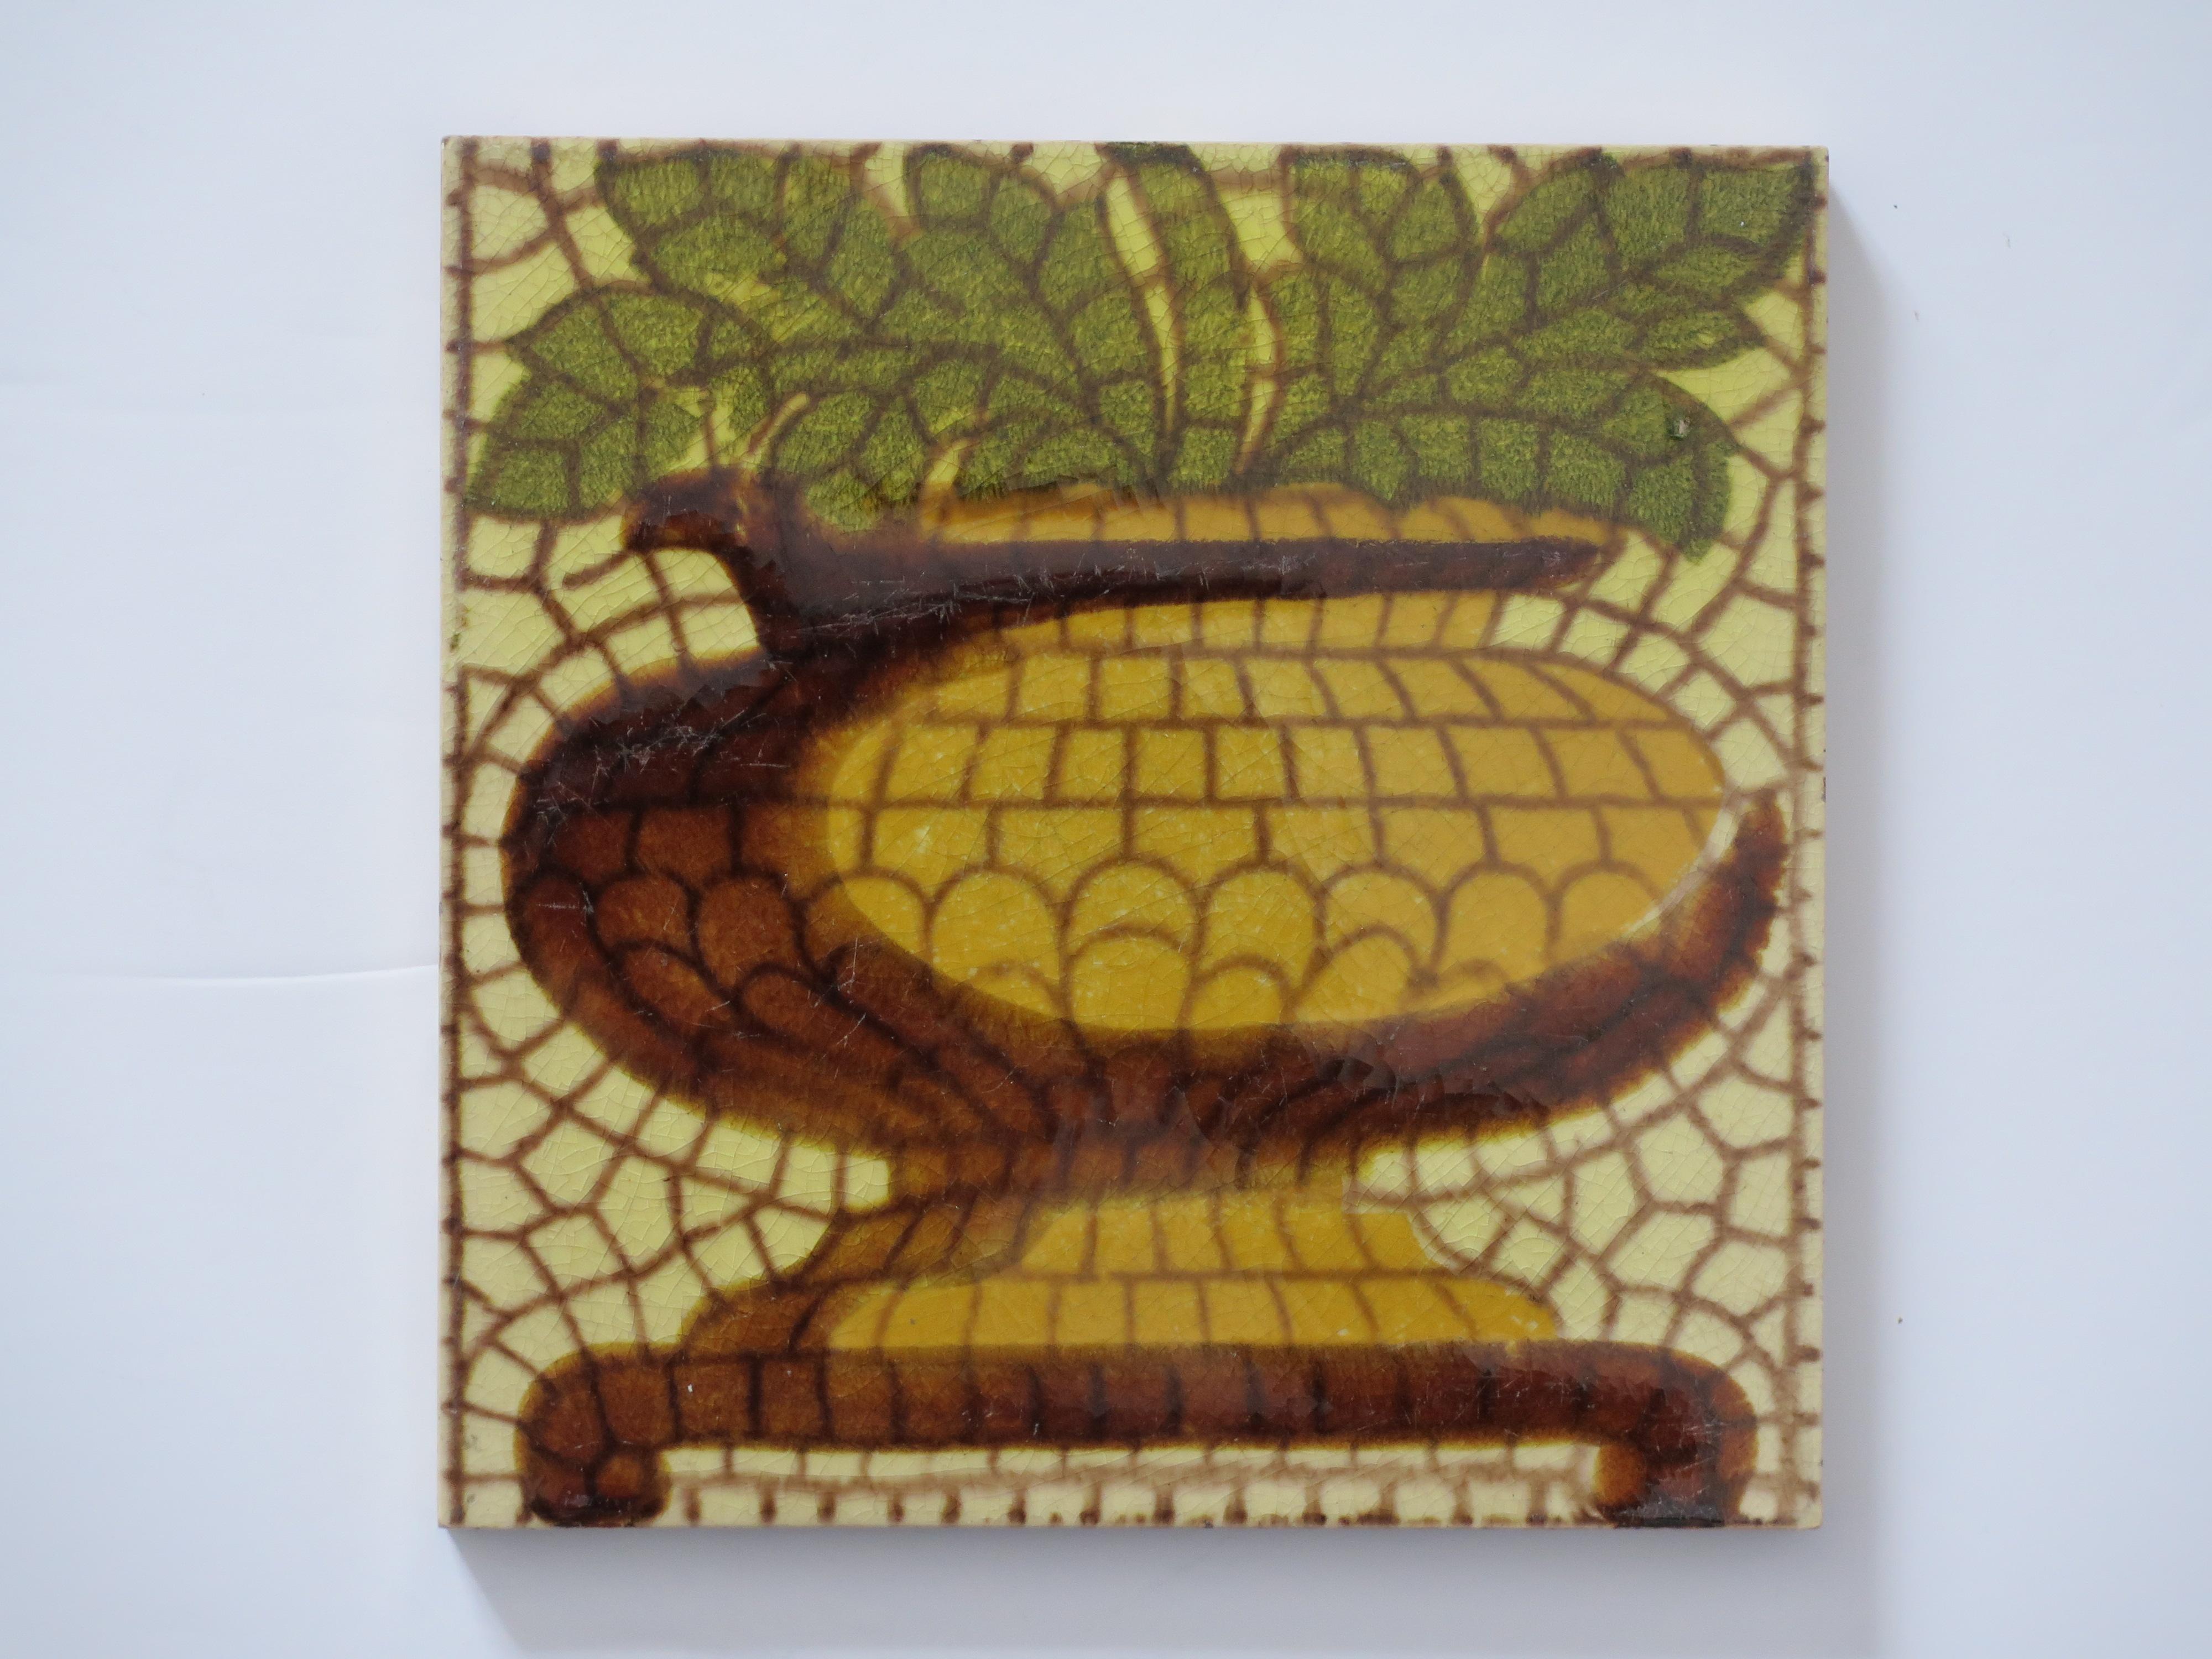 These are a good set of SIX glazed ceramic vintage wall tiles, decorated in a pineapple vase pattern and dating to the mid-20th century, circa 1960. 

Each tile is nominally 6 inches ( 15.3cm) square. The tiles have a pineapple vase pattern with